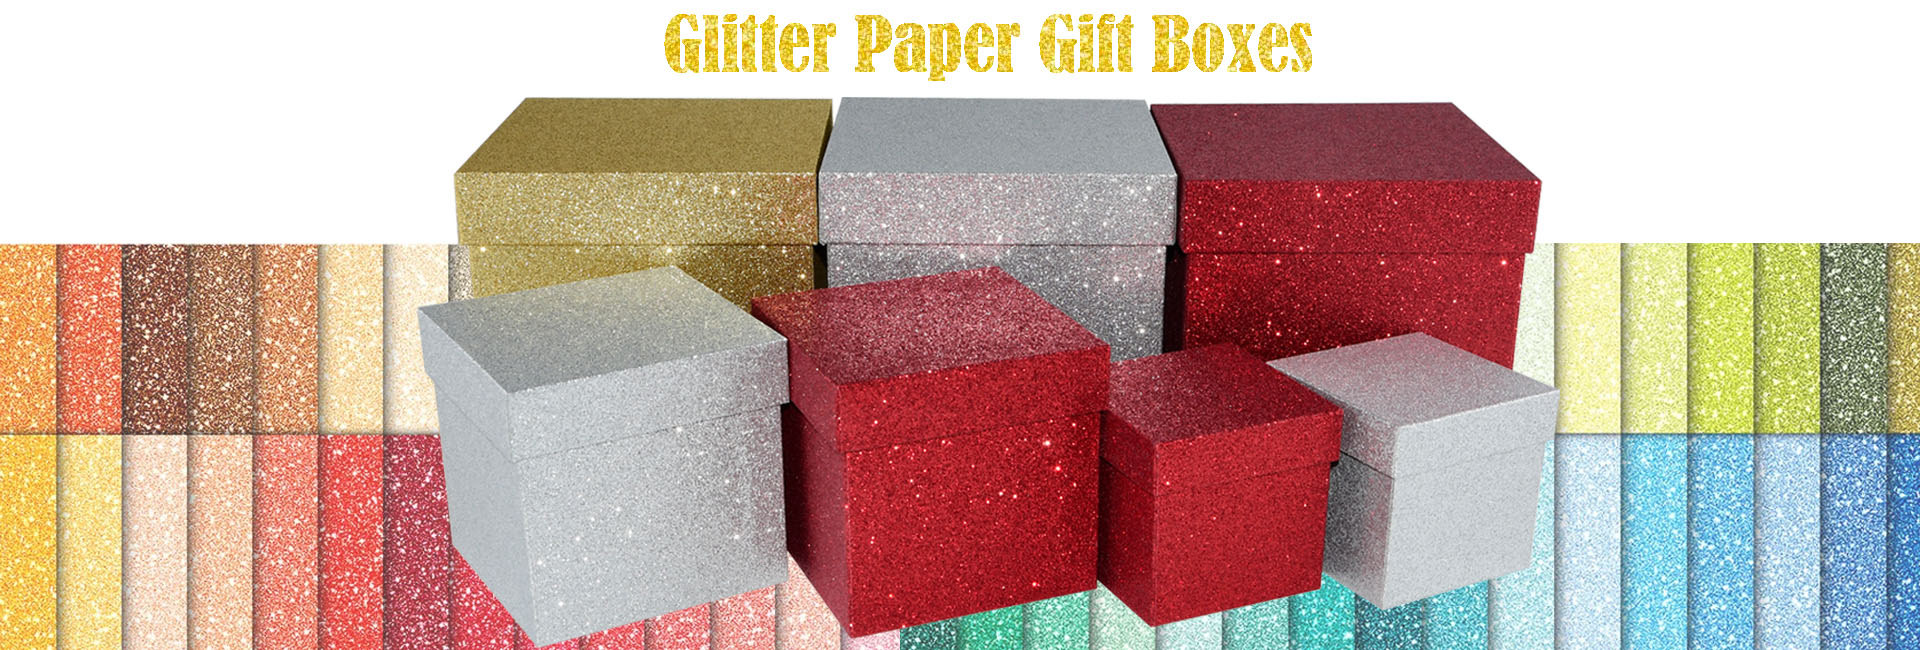 Glitter Paper Gift Boxes 